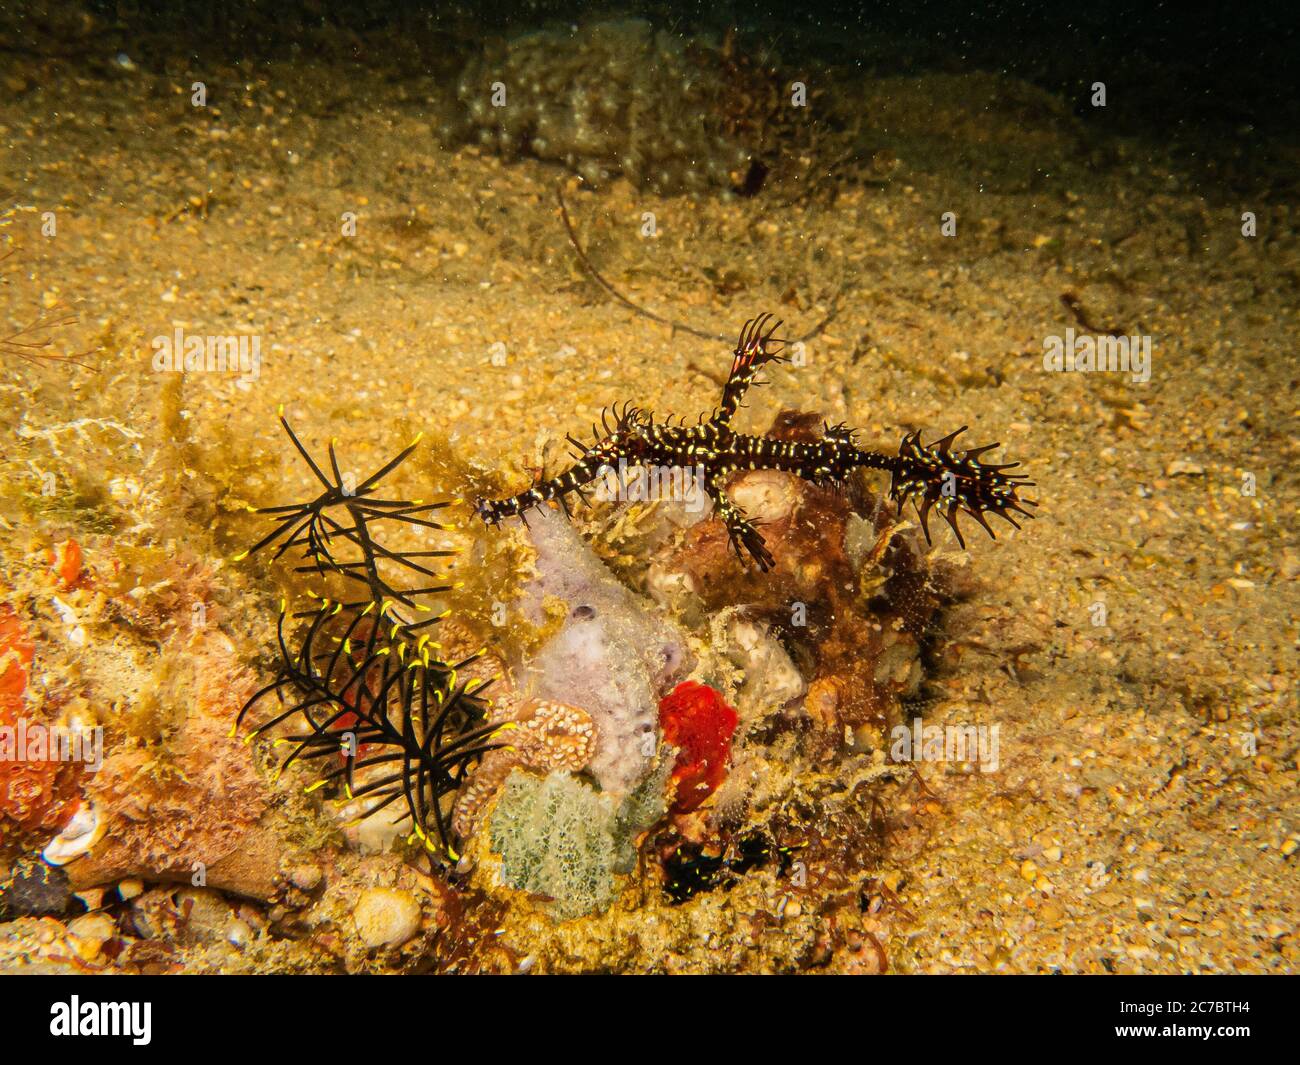 Ornate ghost pipefish or harlequin ghost pipefish, Solenostomus paradoxus at a Puerto Galera tropical coral reef in the Philippines. Outstanding biodiversity in the center of the coral triangle Stock Photo